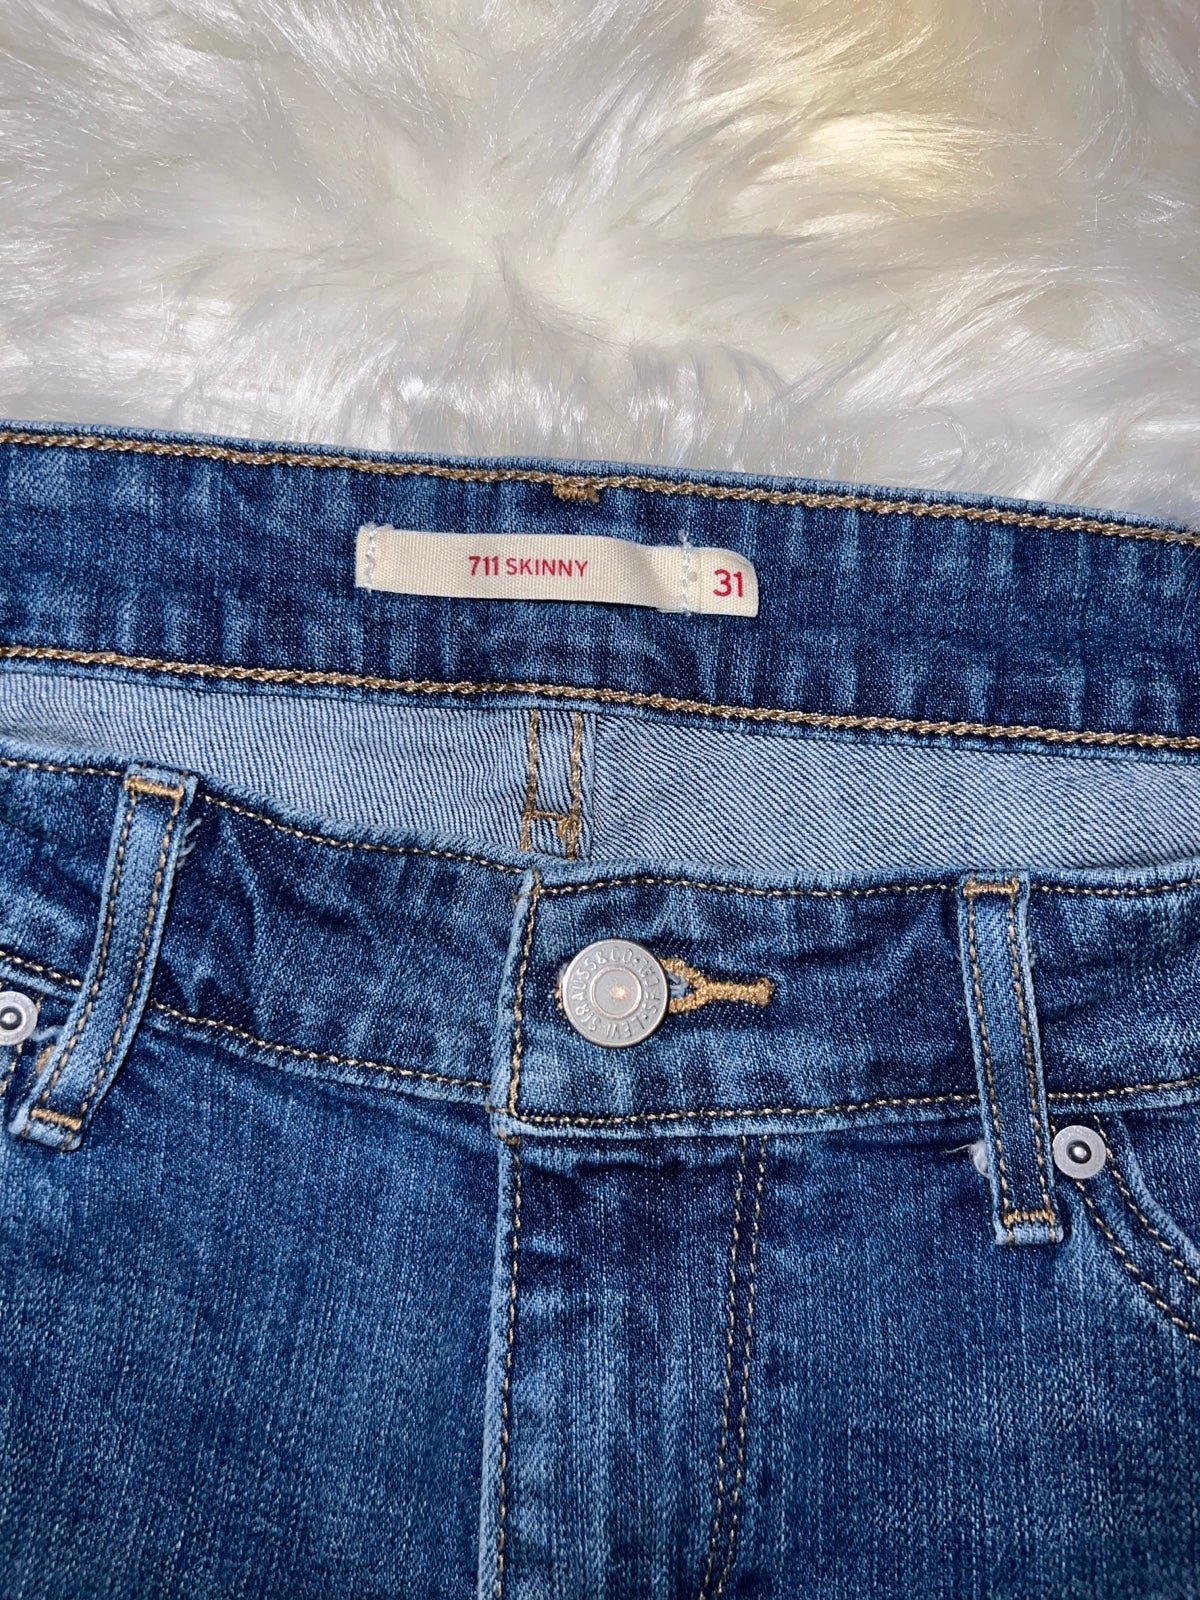 Wholesale price Levi’s Skinny Jeans Jy6cyG0k0 all for you